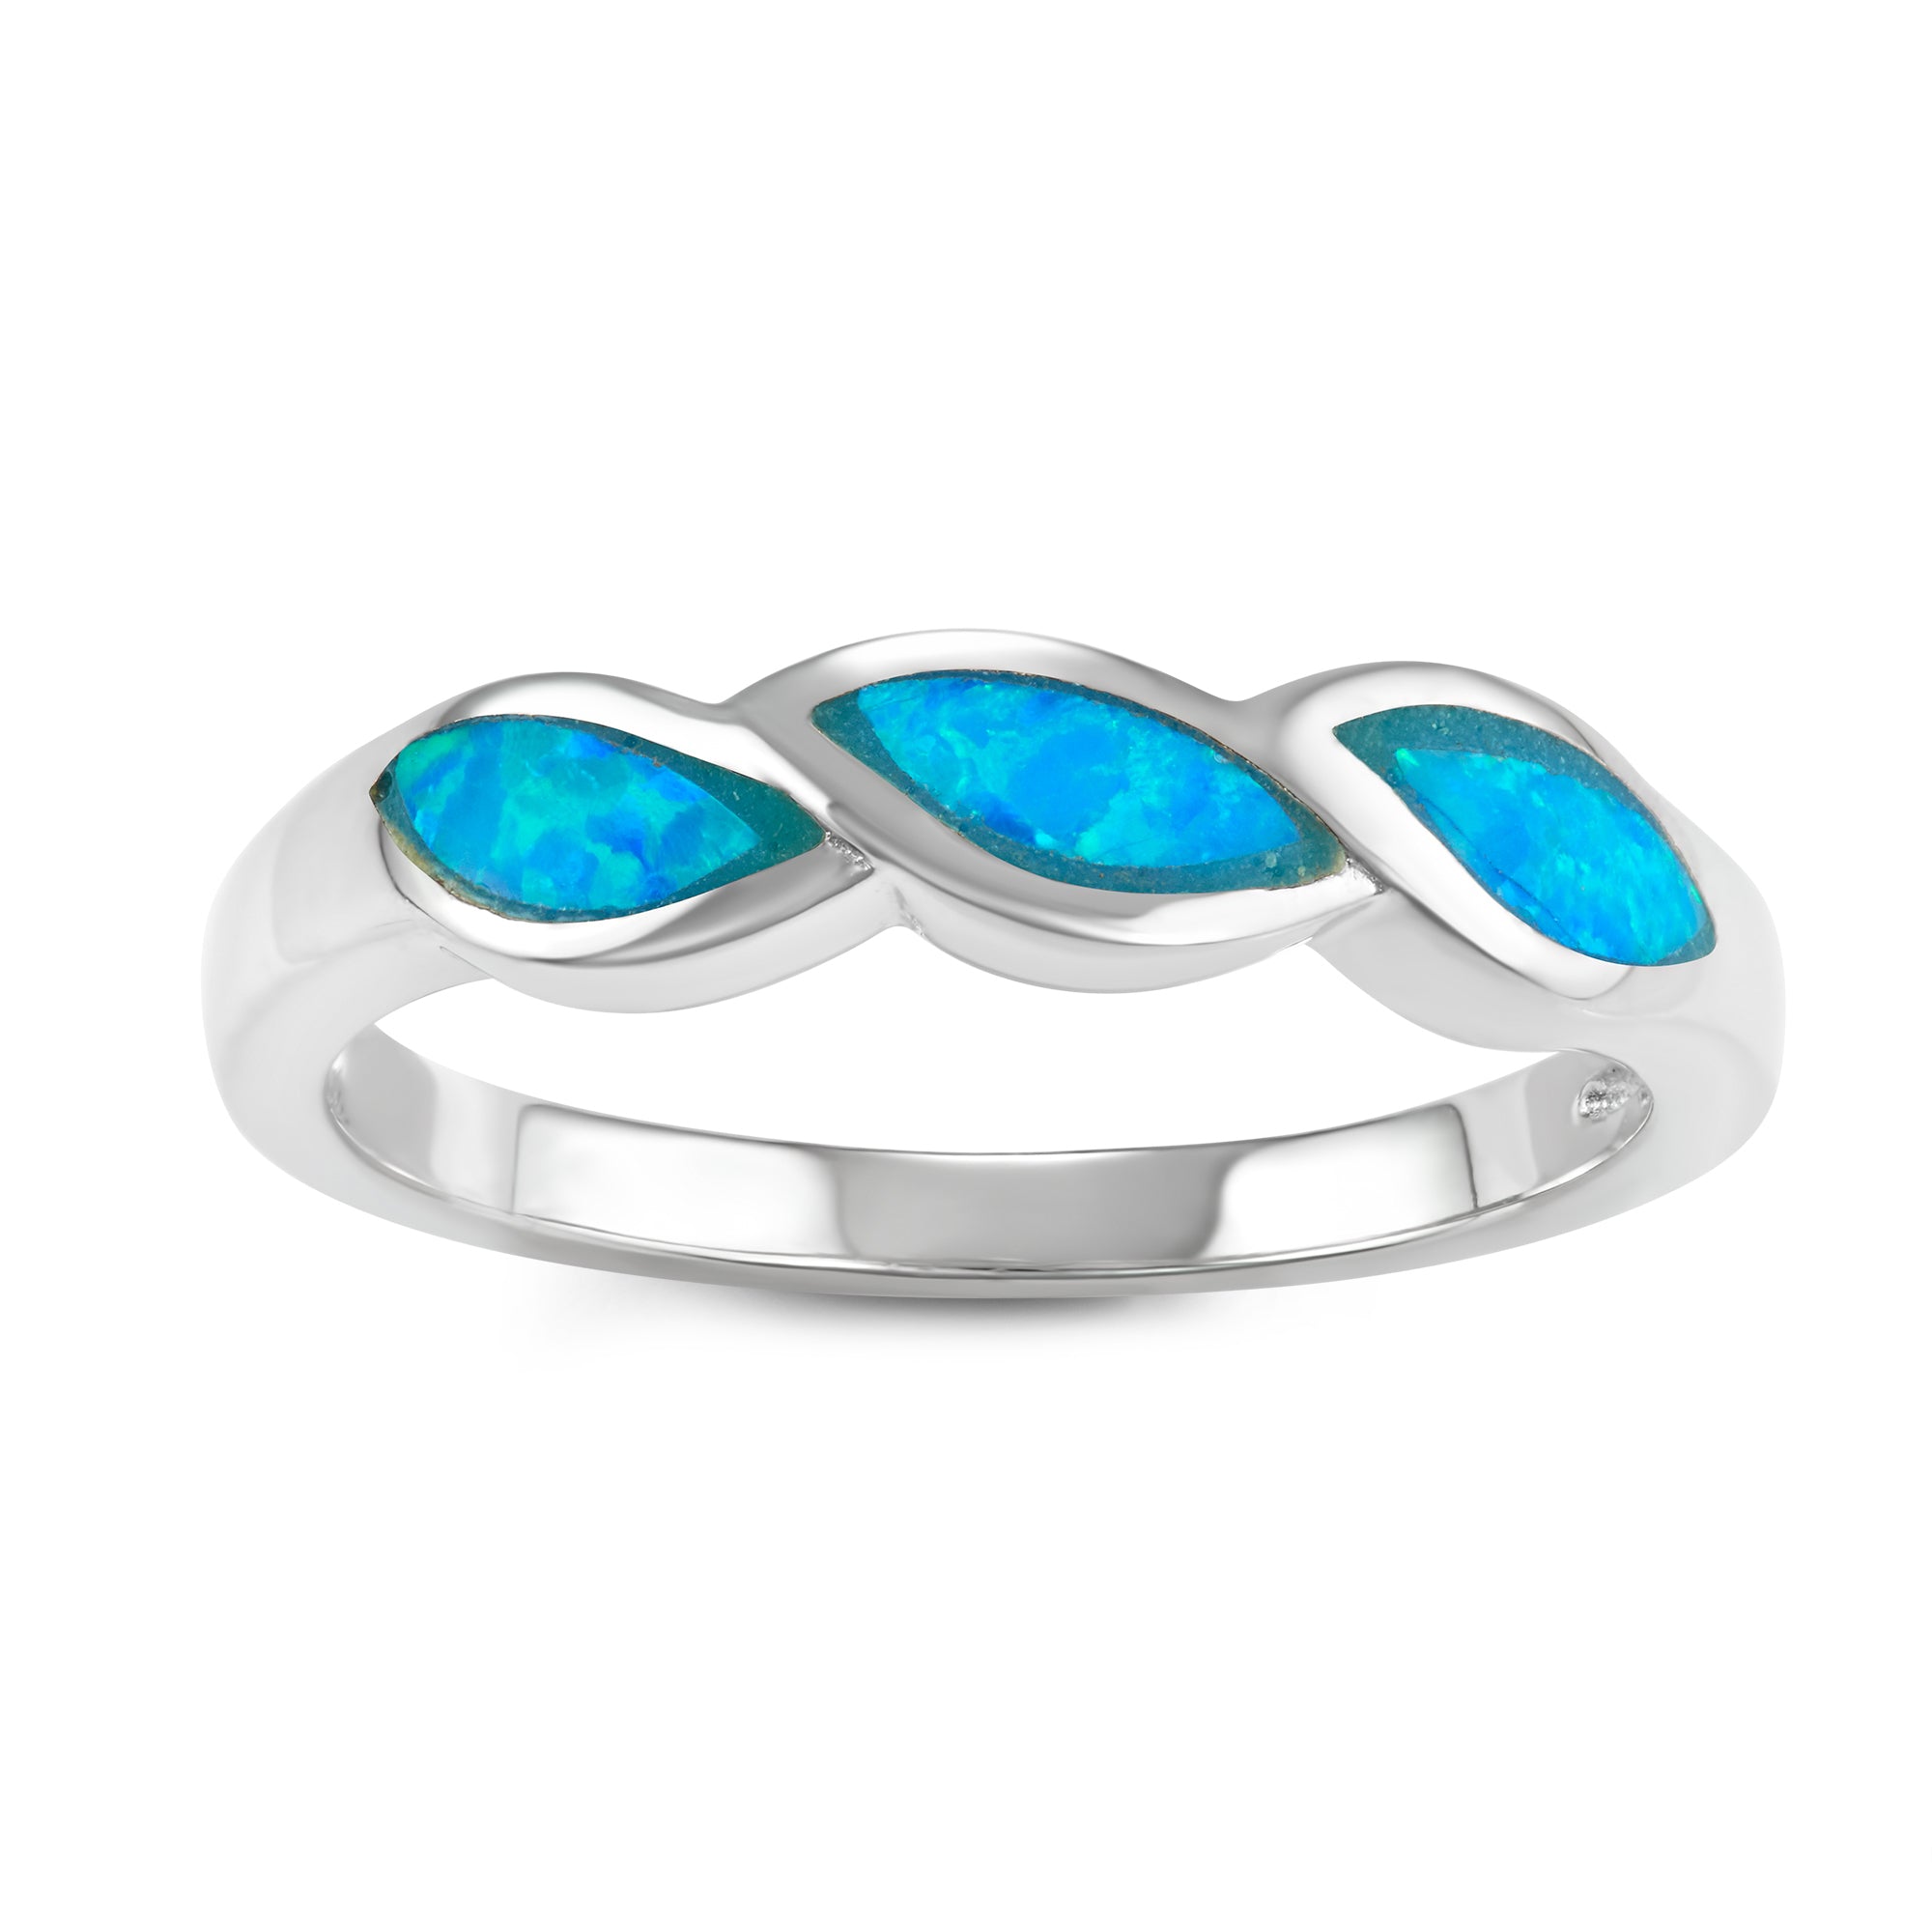 R028047 - Sterling Silver and Blue Inlay Opal Wavy Twist Ring